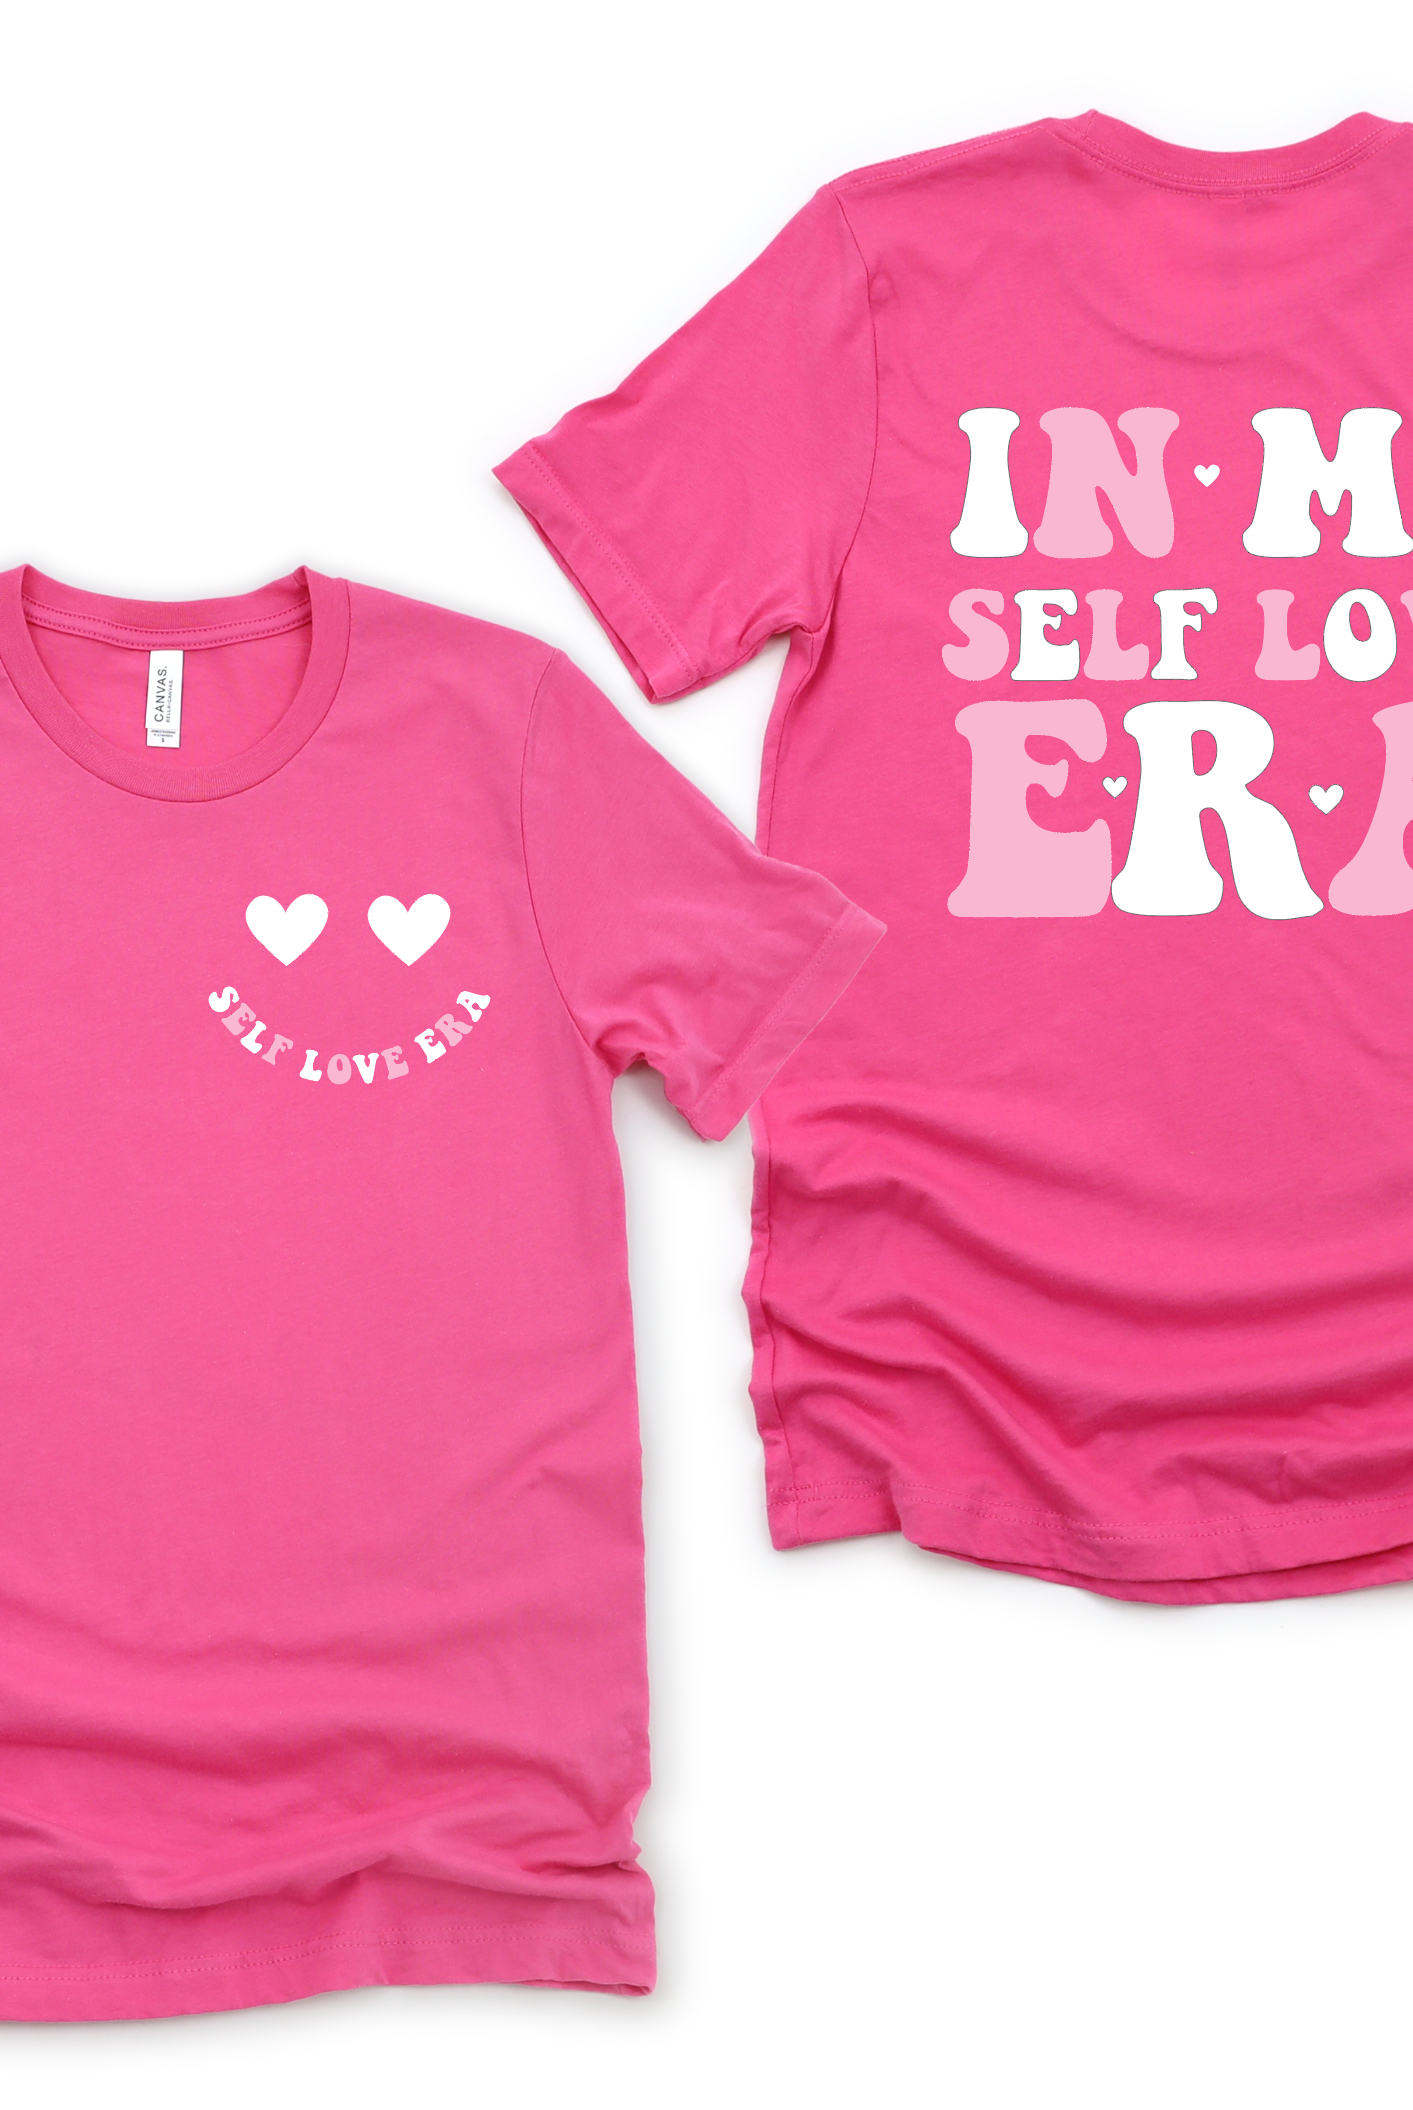 Valentine Self Love Era-Graphic Tee- Simply Simpson's Boutique is a Women's Online Fashion Boutique Located in Jupiter, Florida